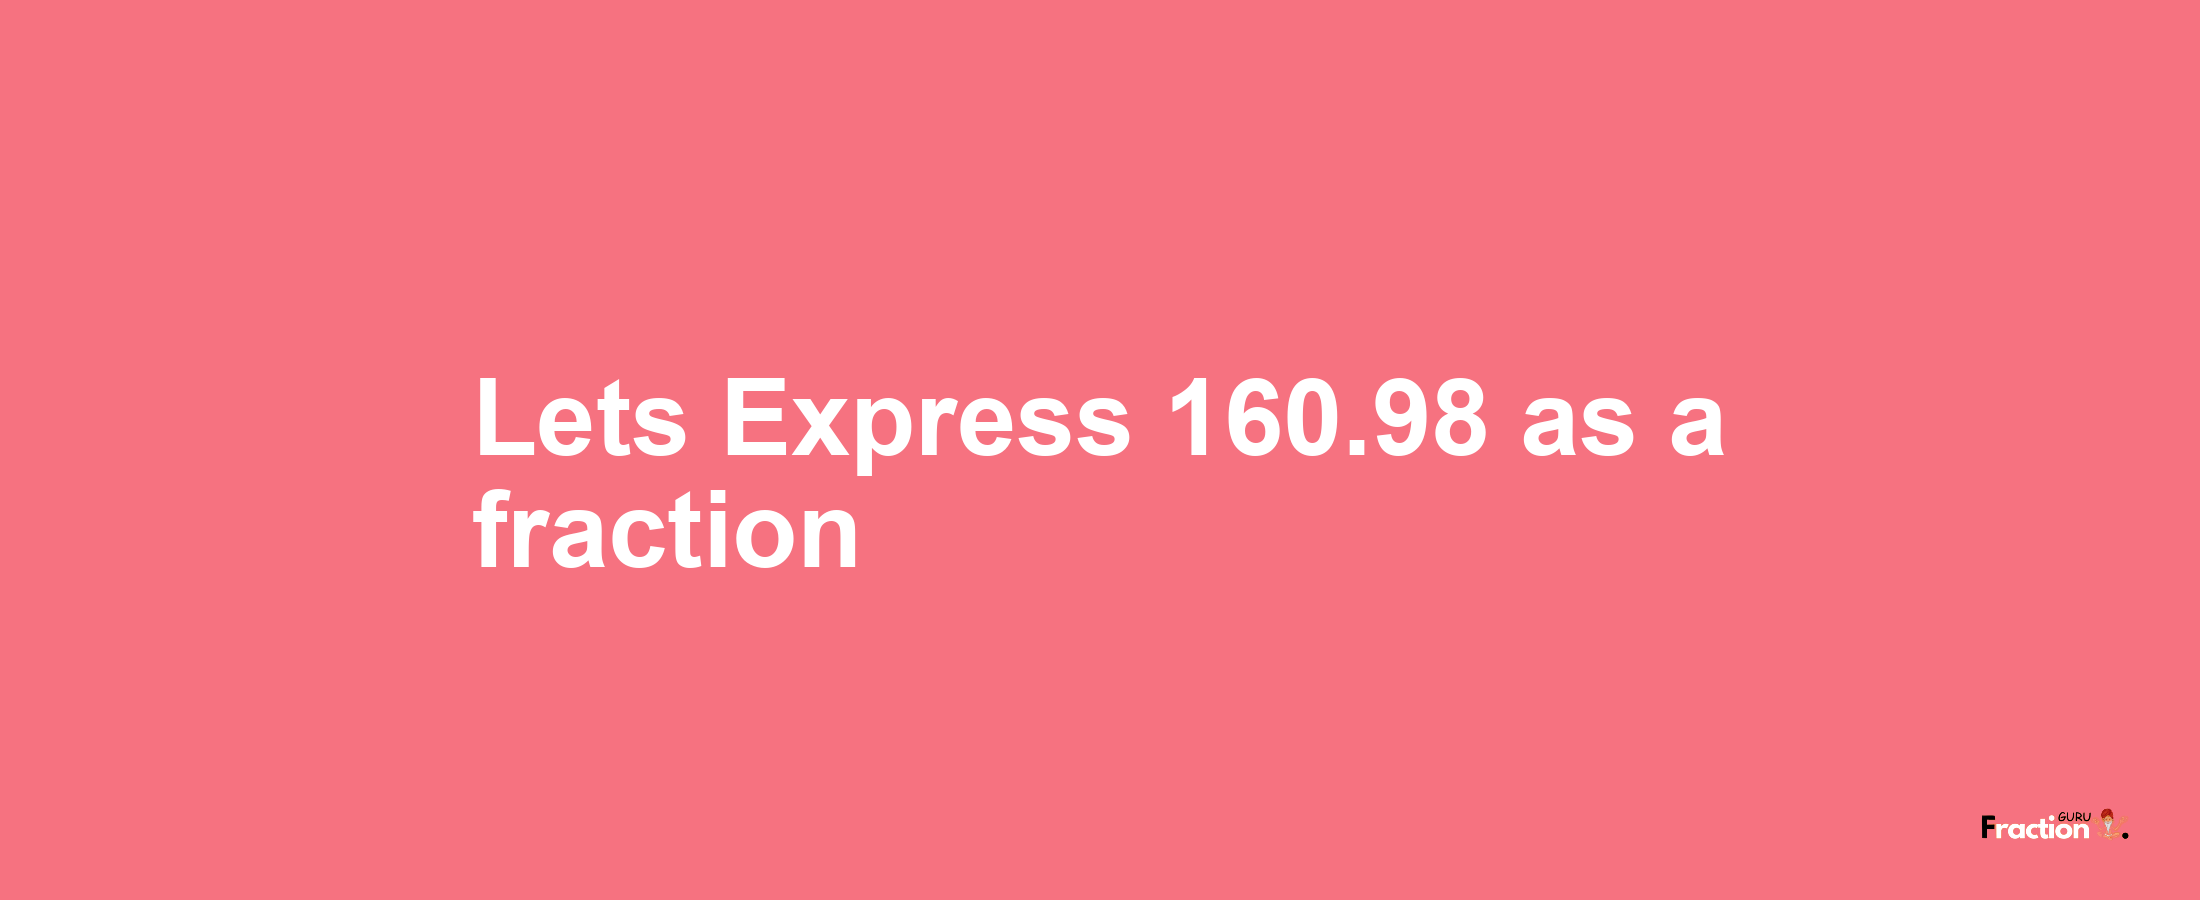 Lets Express 160.98 as afraction